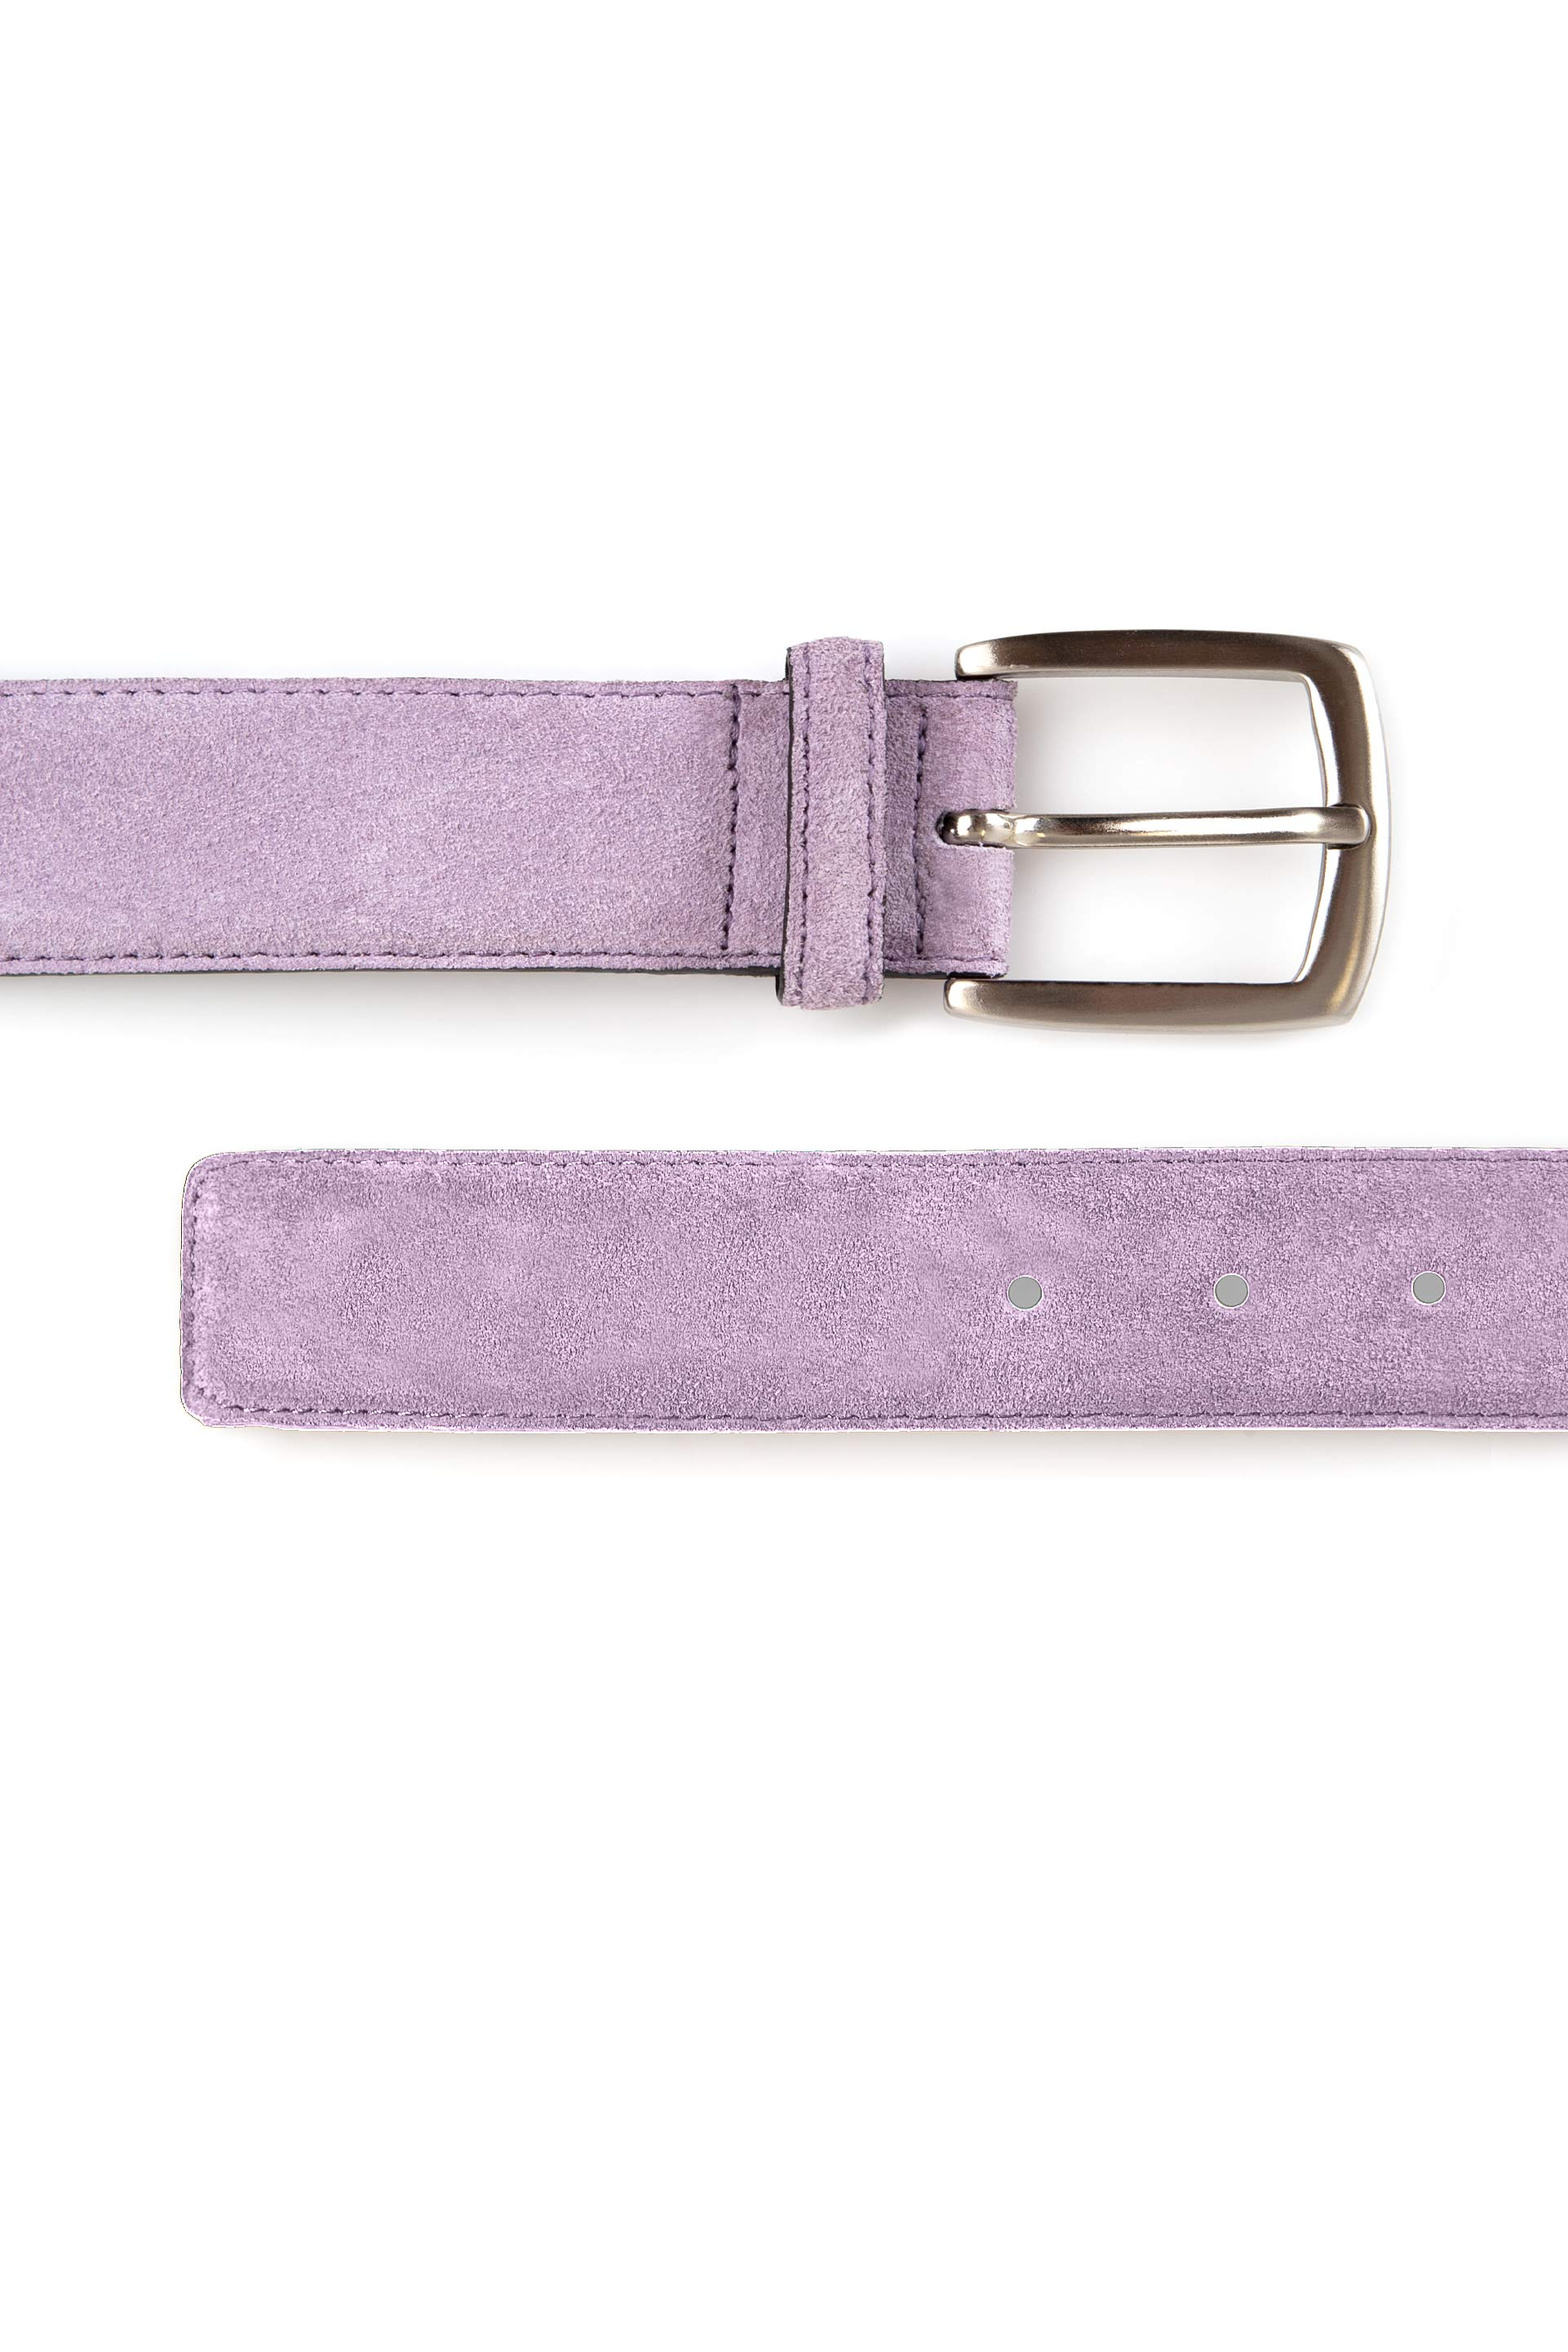 be500_classic_suede_belt_lavender_suede_white_background.jpg